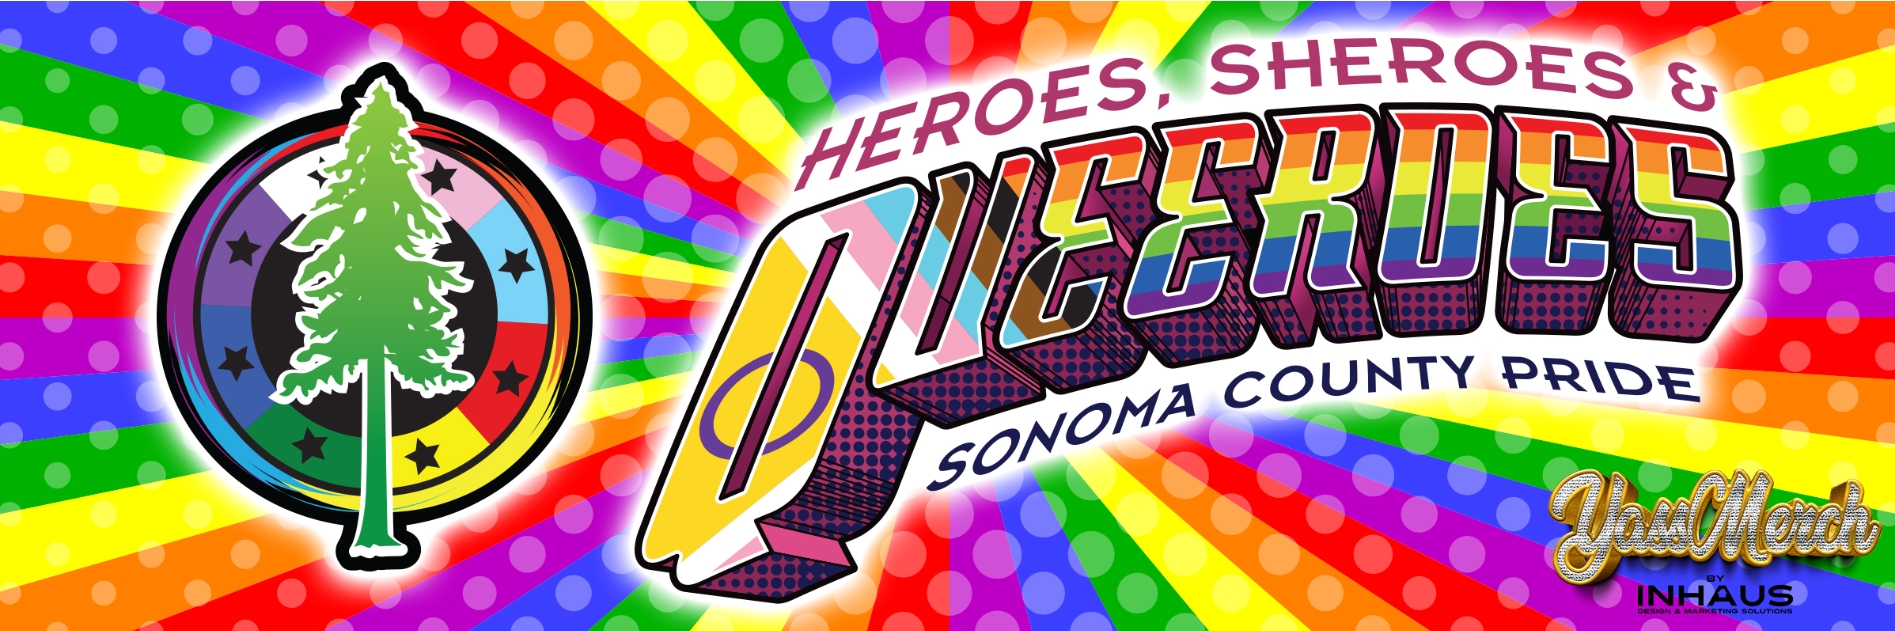 Sonoma County Pride Parade theme: Heroes, Sheroes & Queeroes